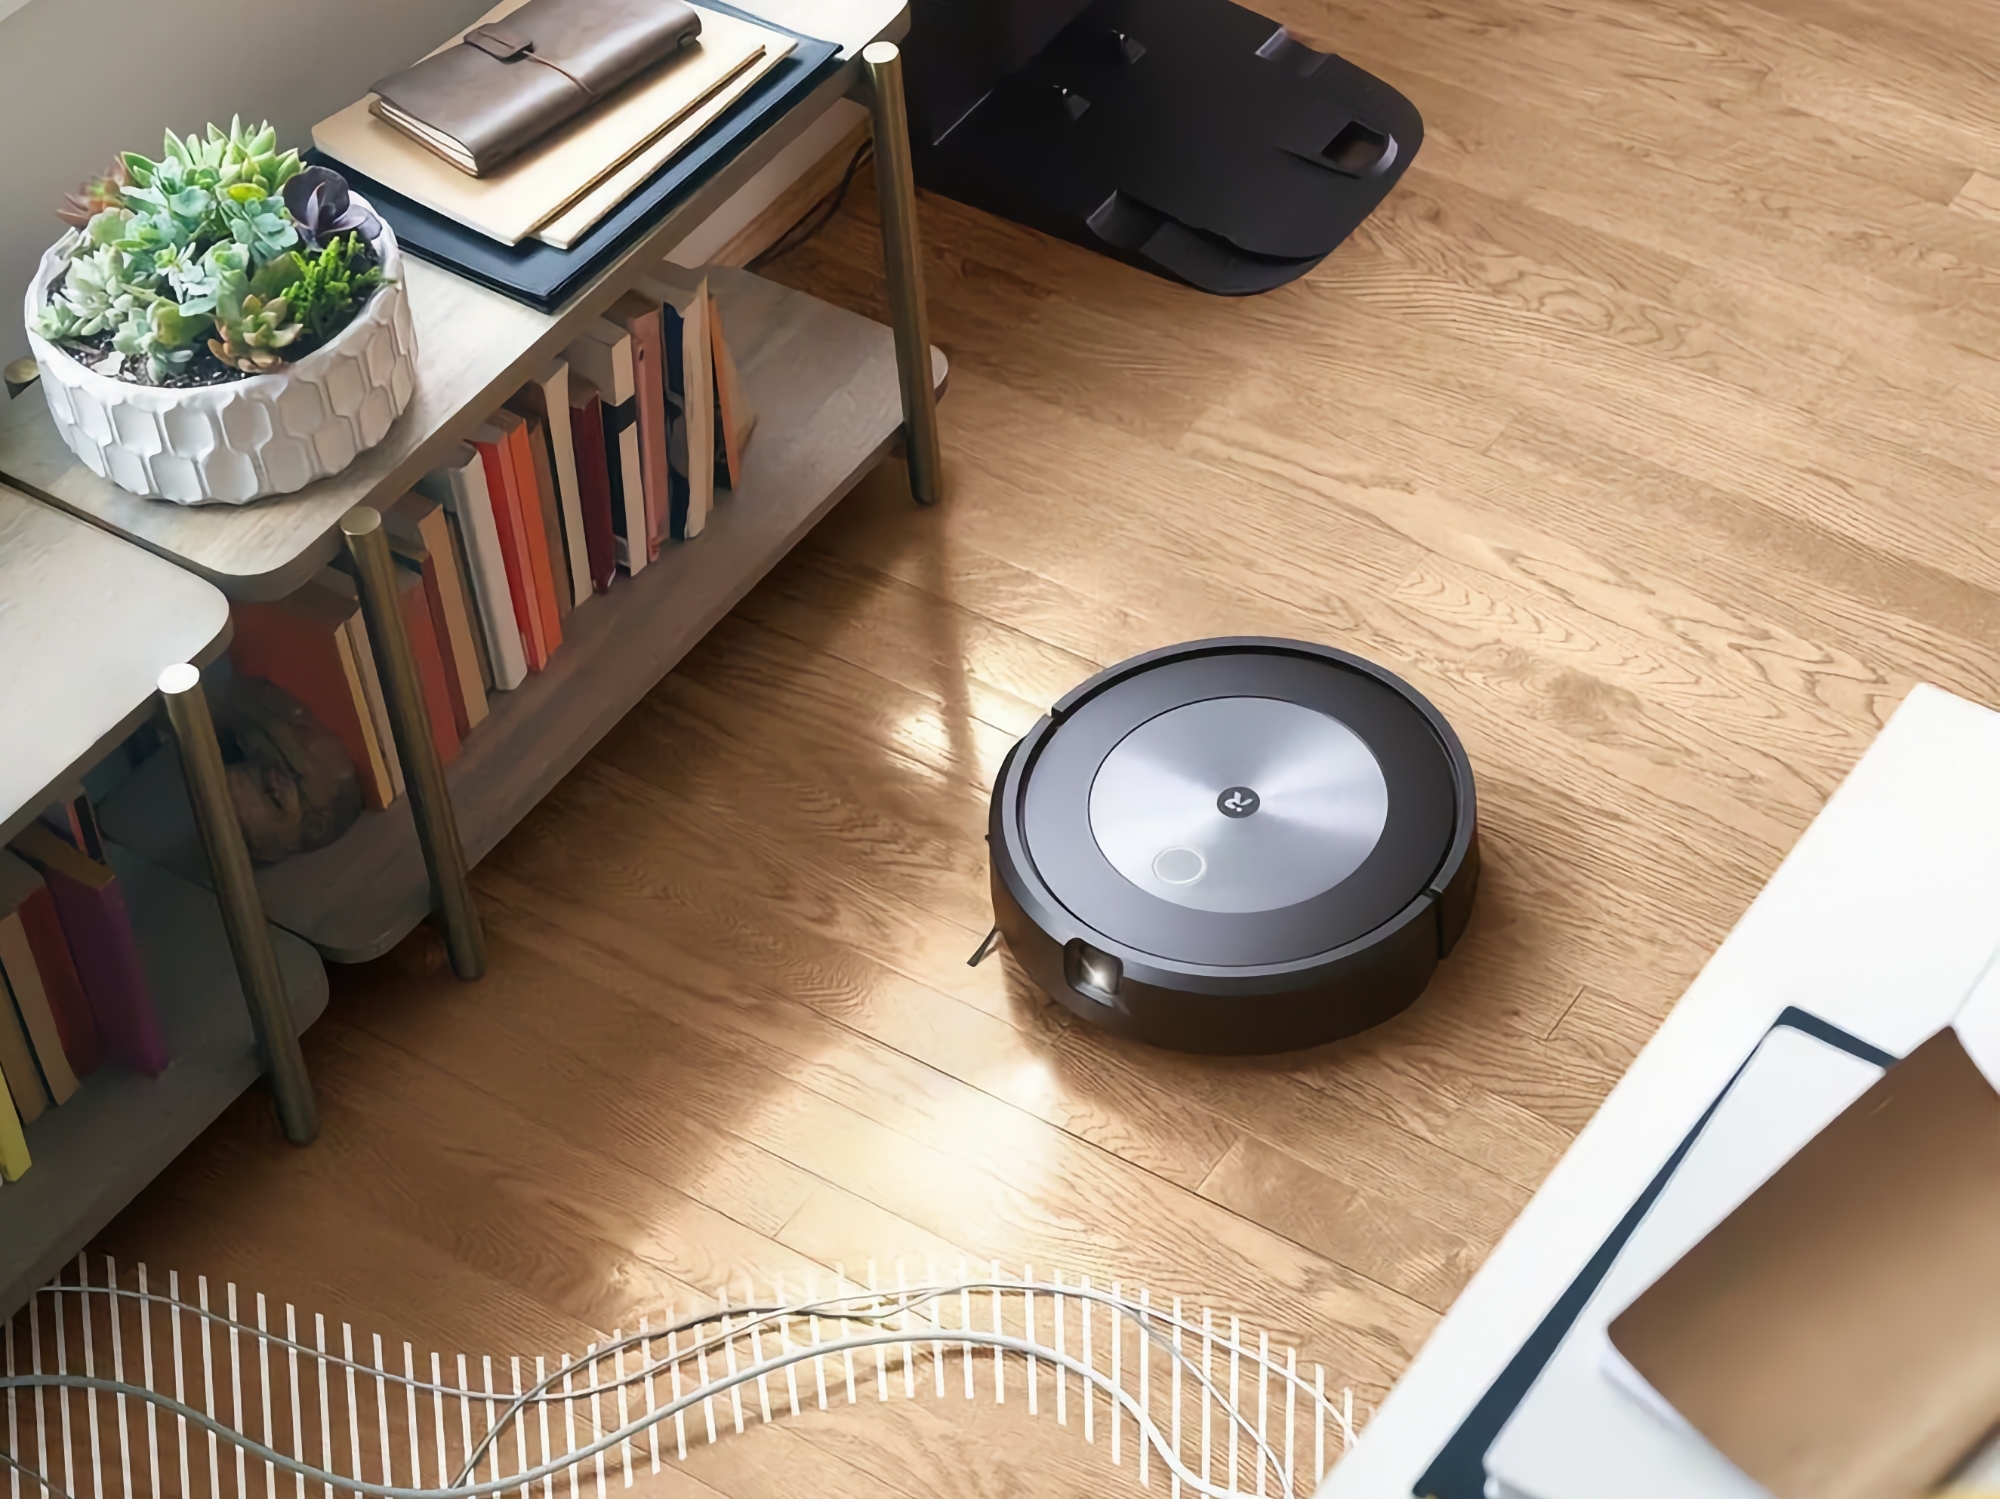 iRobot’s high-end Roomba s9+ robot vacuum is $250 off right now | DeviceDaily.com